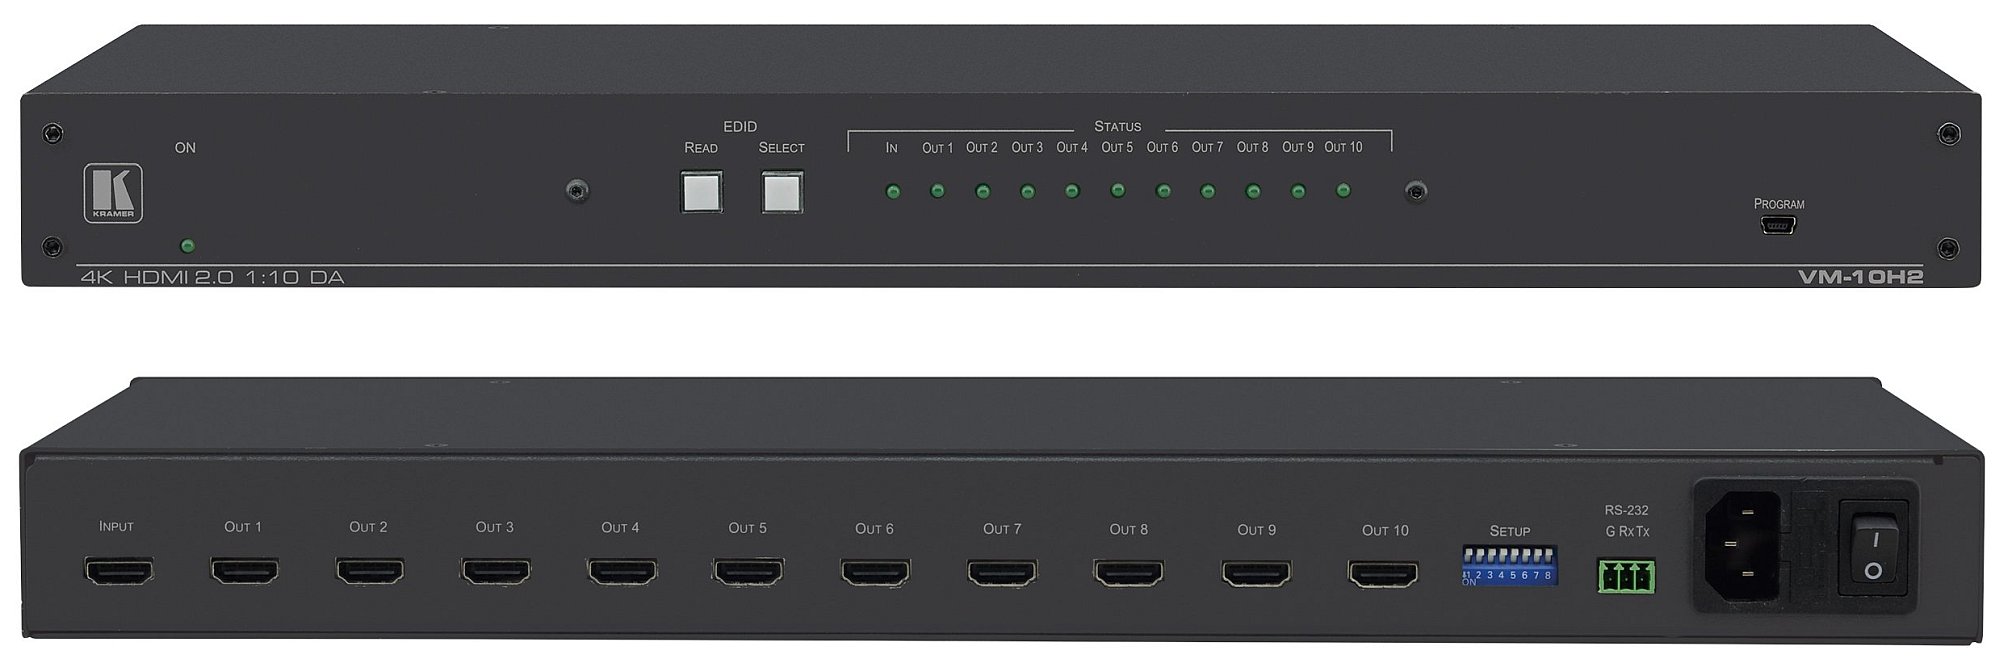 HDMI 1 in 10 out, VM-10H2